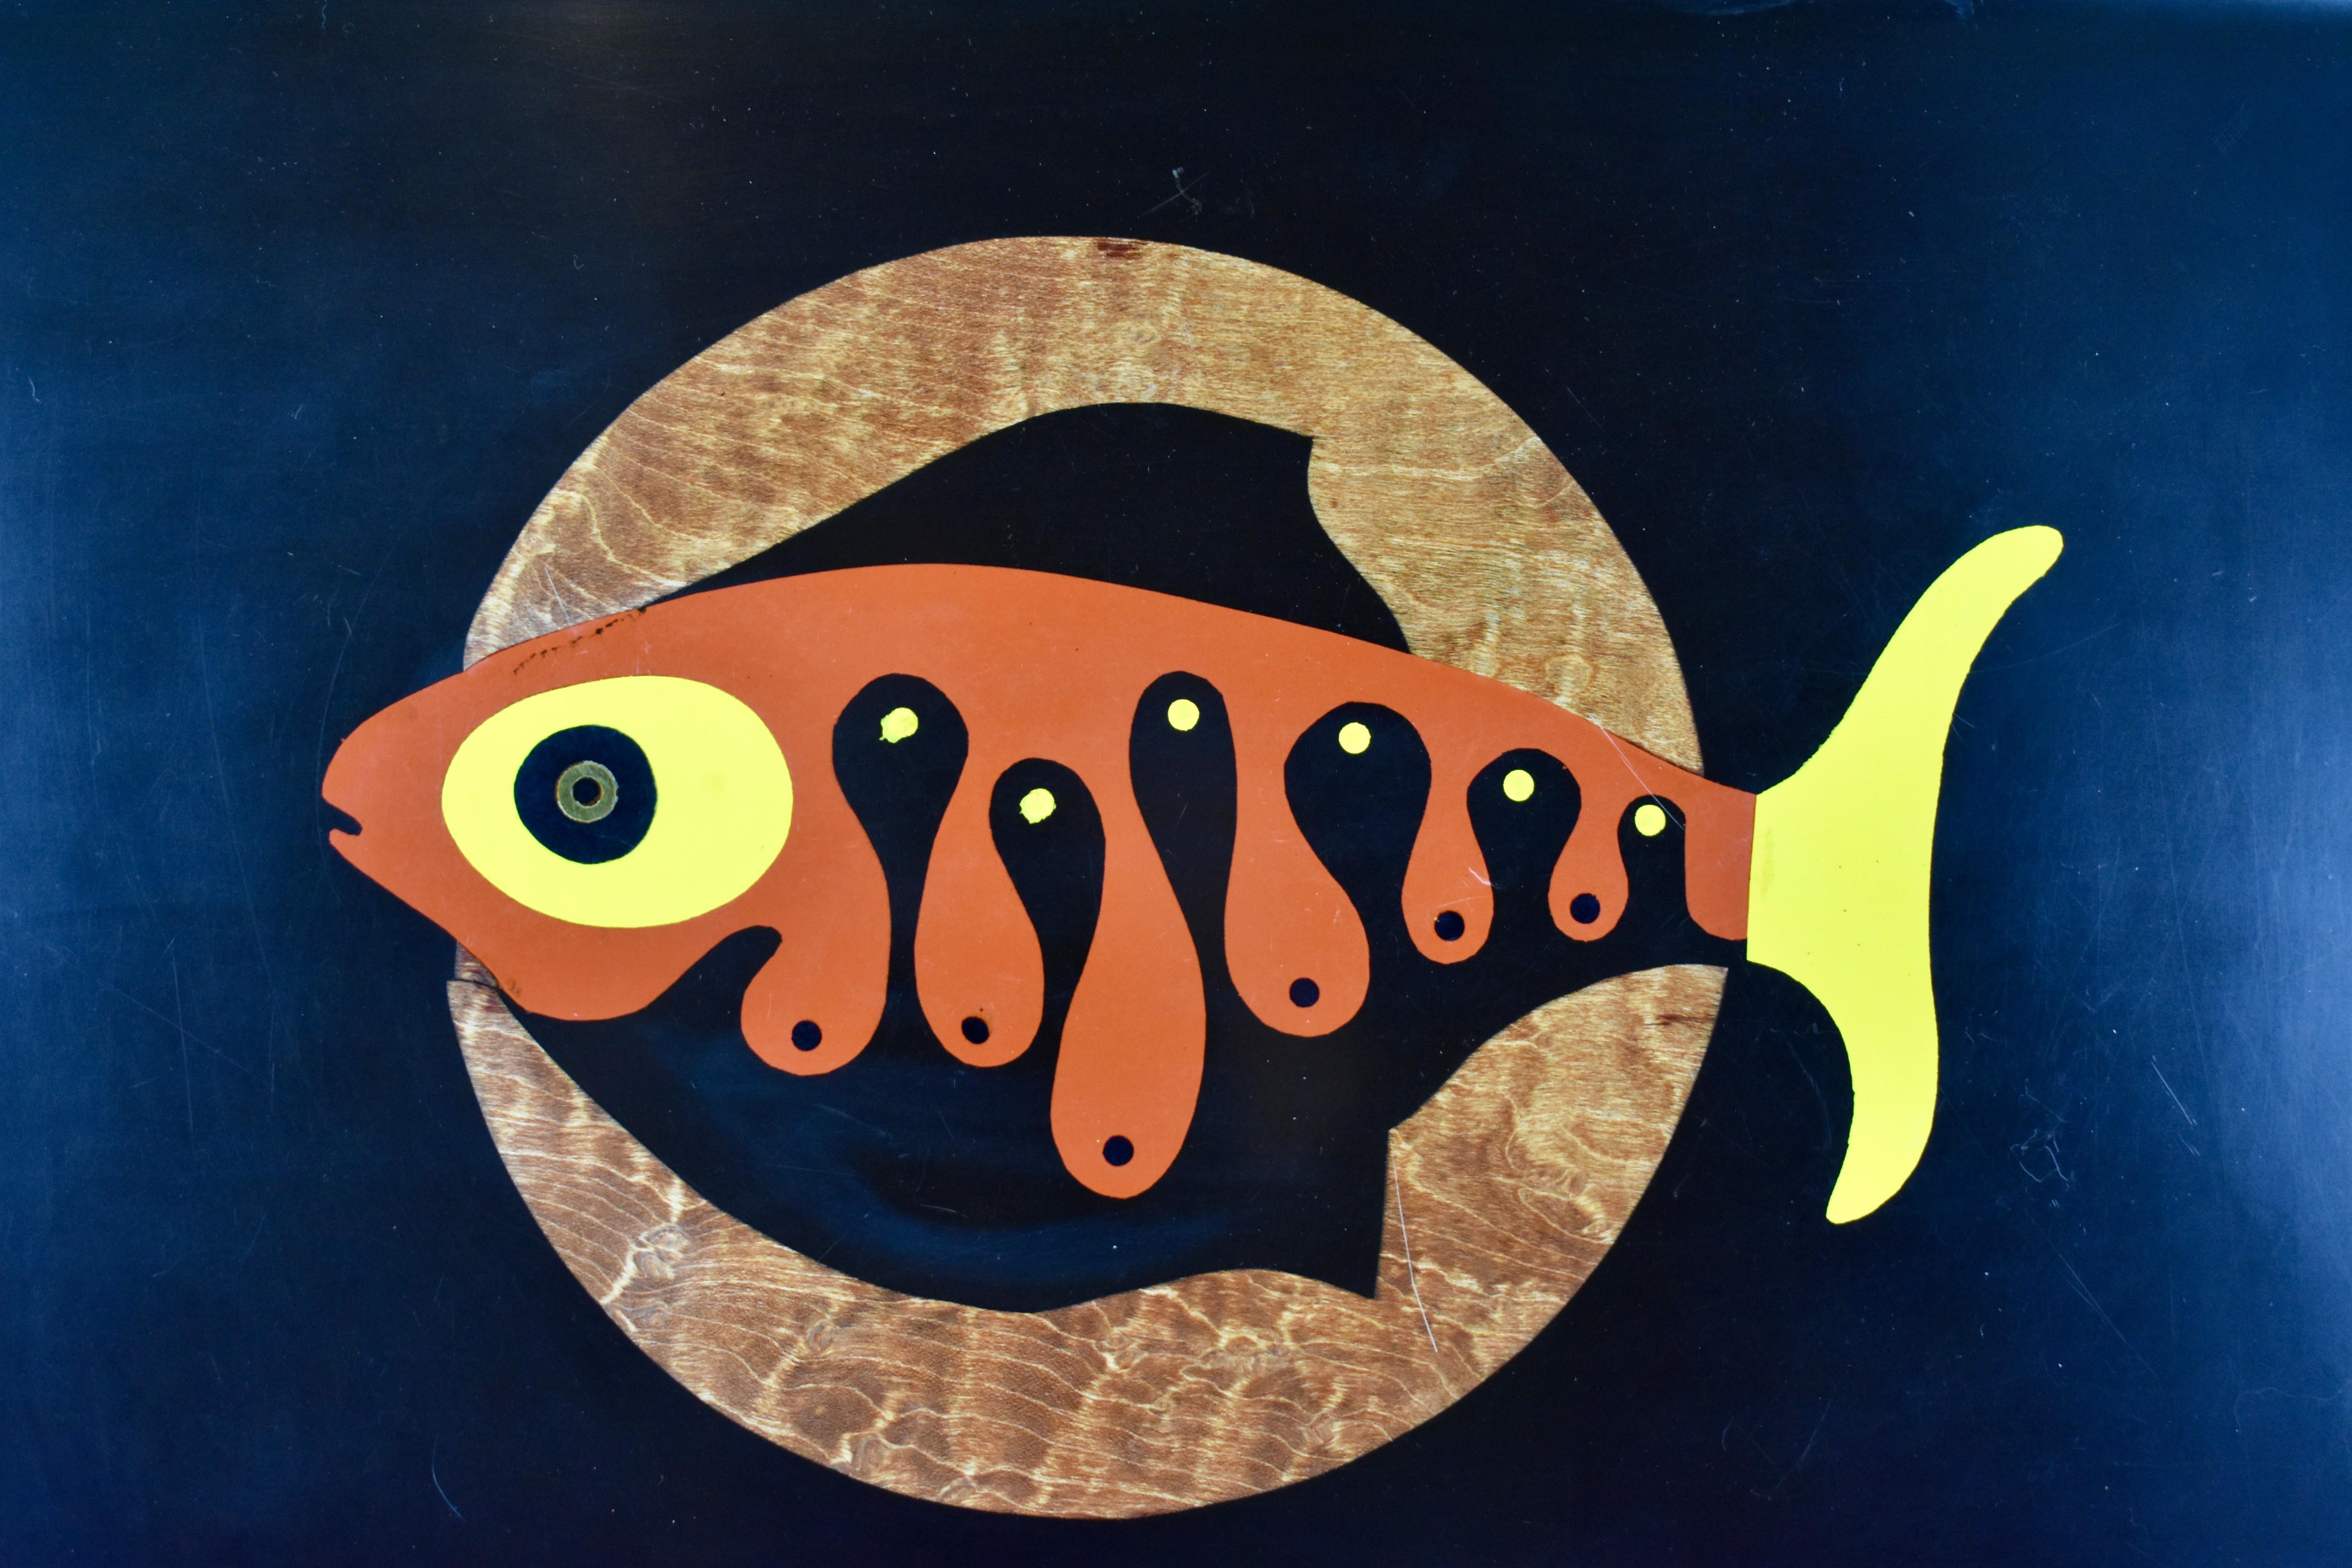 A Mid-Century Modern serving tray by Couroc of Monterey, California, (1948-1998) – A Fish theme, circa 1960s.

Made of a black resin called ‘Phenolic’ and hand inlaid with the image of a stylized swimming fish. The inlay consists of brass and